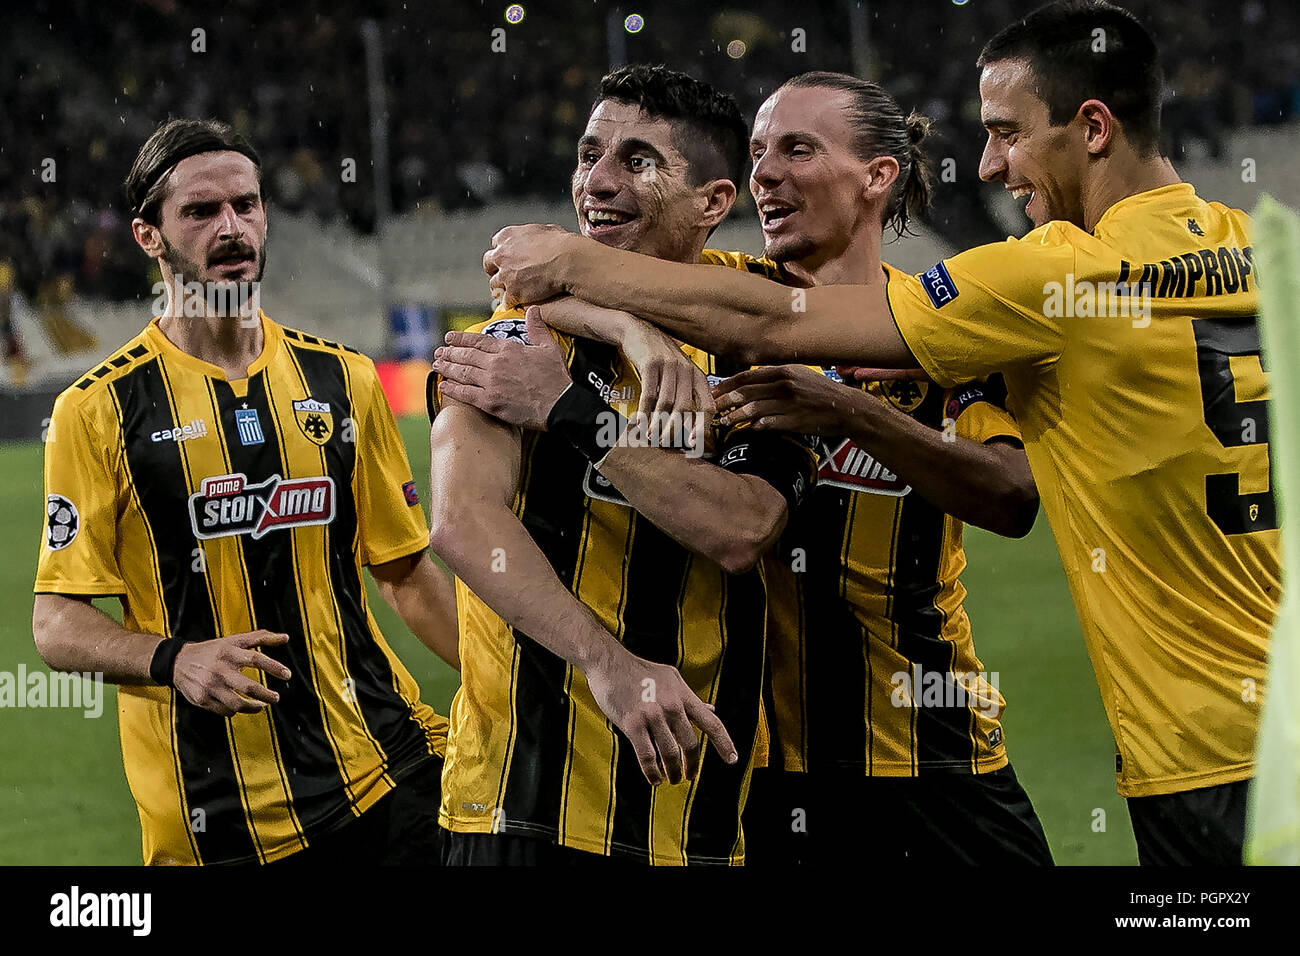 Athens, Greece. 28th Aug, 2018. AEK's Petros Mantalos (2nd L) celebrates  with his teammates during the Champions League Play-Off leg 2 soccer match  between AEK Athens and MOL Vidi FC at Olympic